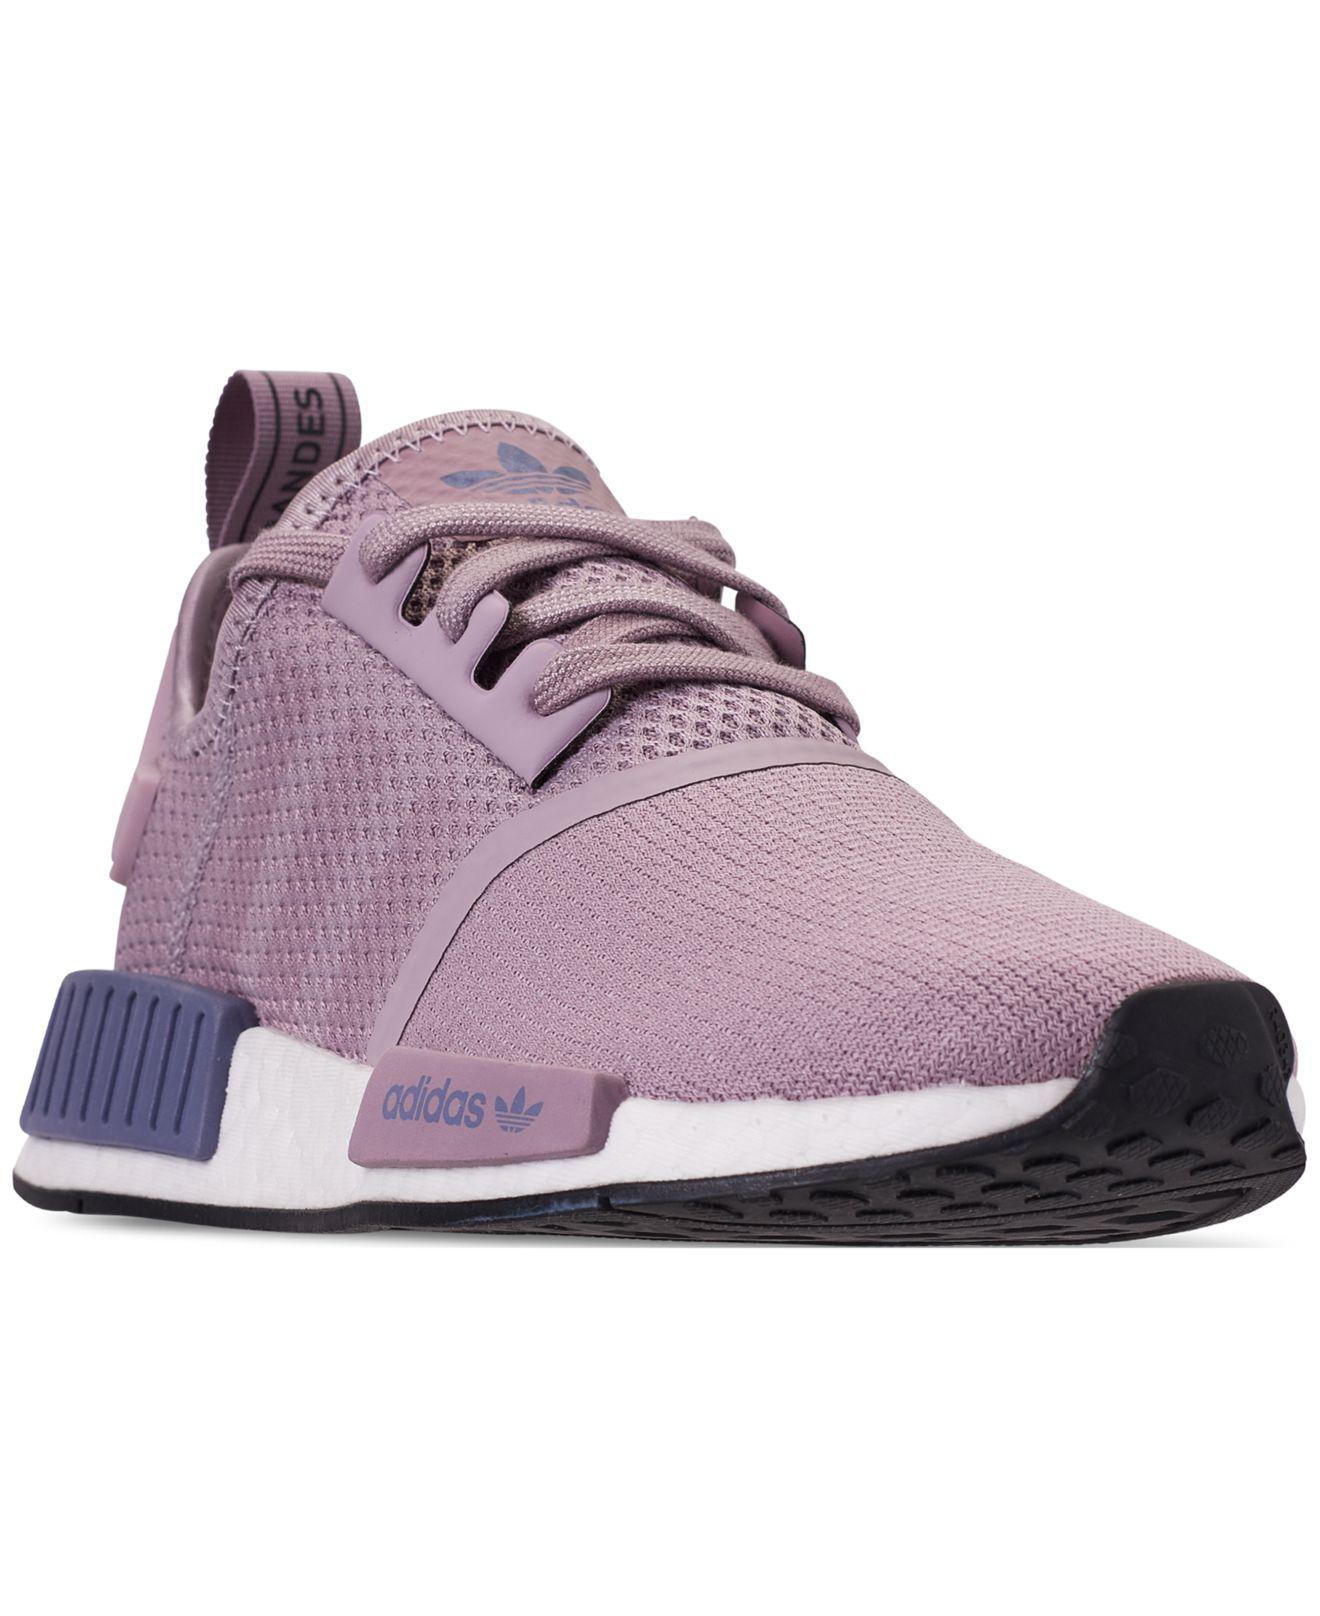 nmd r1 lila Clothing and Fashion | Dresses, Denim, Tops, Shoes and More |  Free Shipping